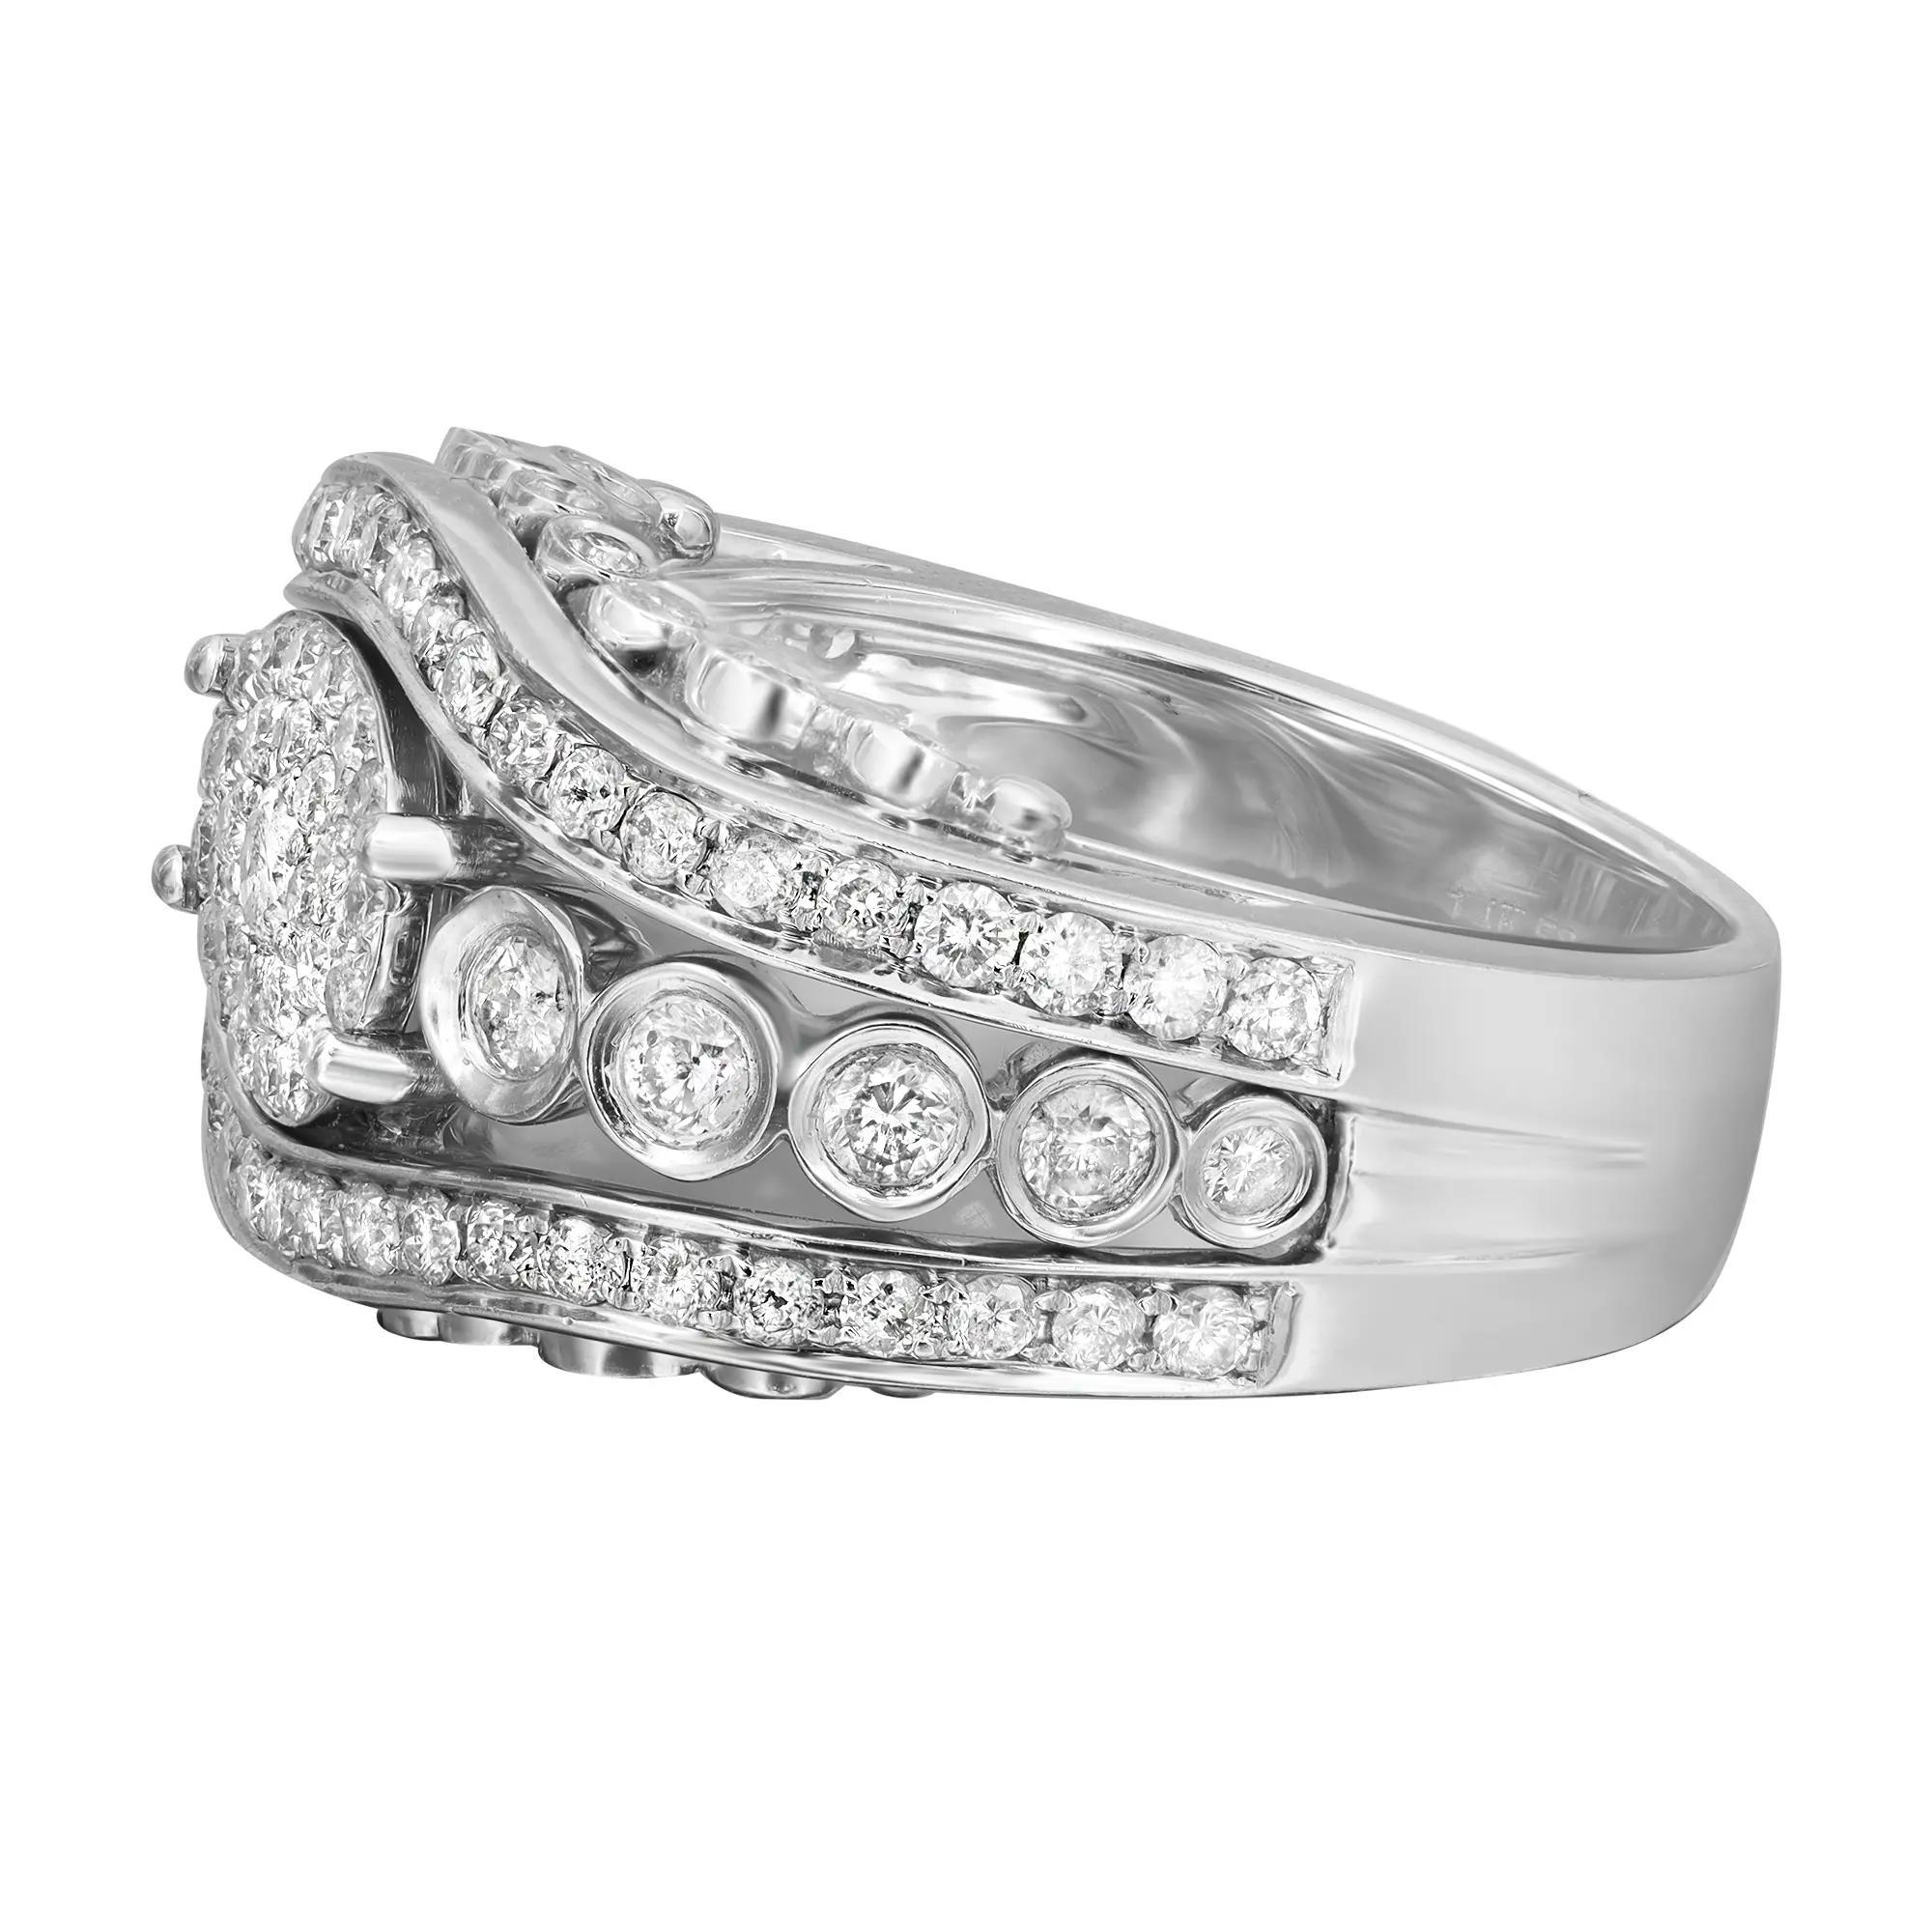 Modern ladies thick band cocktail ring crafted in 14k white gold. This ring features round brilliant cut diamonds encrusted in pave and bezel setting. Total diamond weight: 1.56 carats. Diamond quality: color I and clarity SI2. Ring size: 7.5. Ring